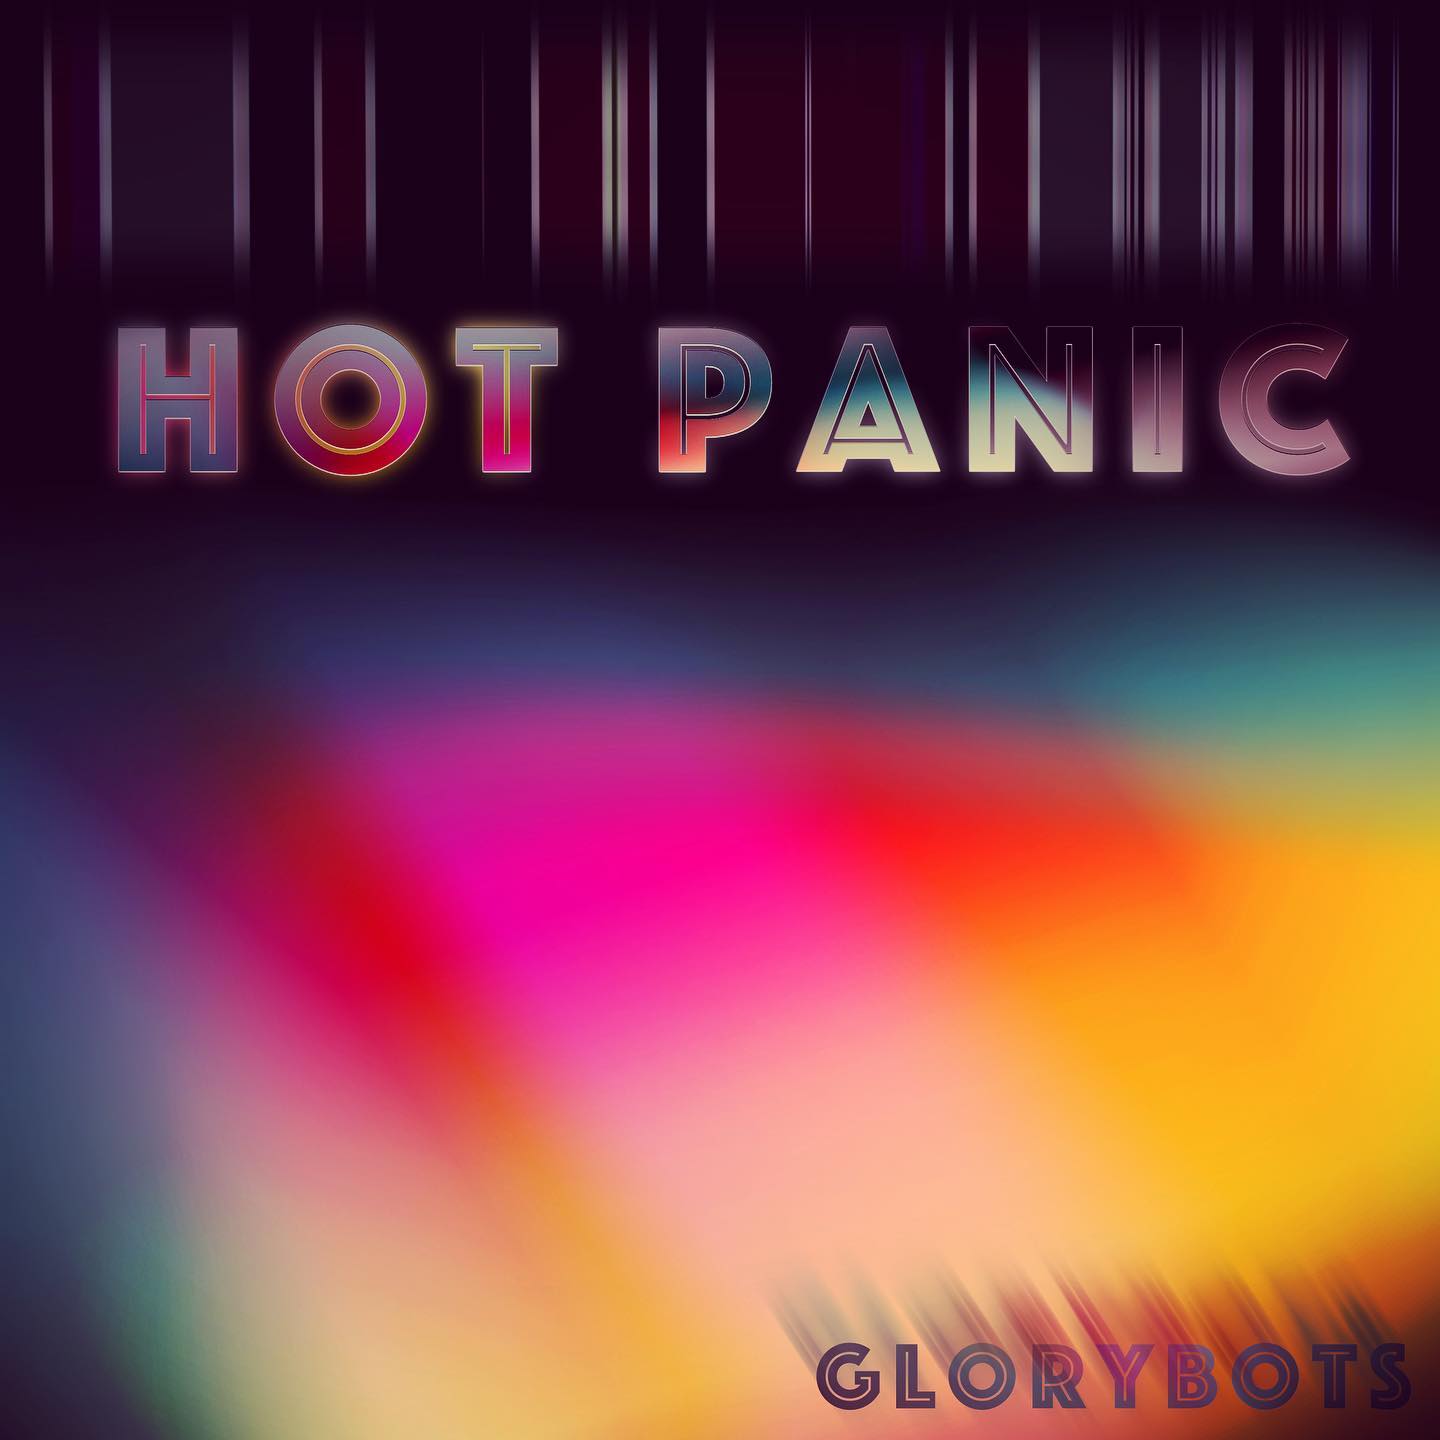 Artwork for the single “Hot Panic” by gloryBots